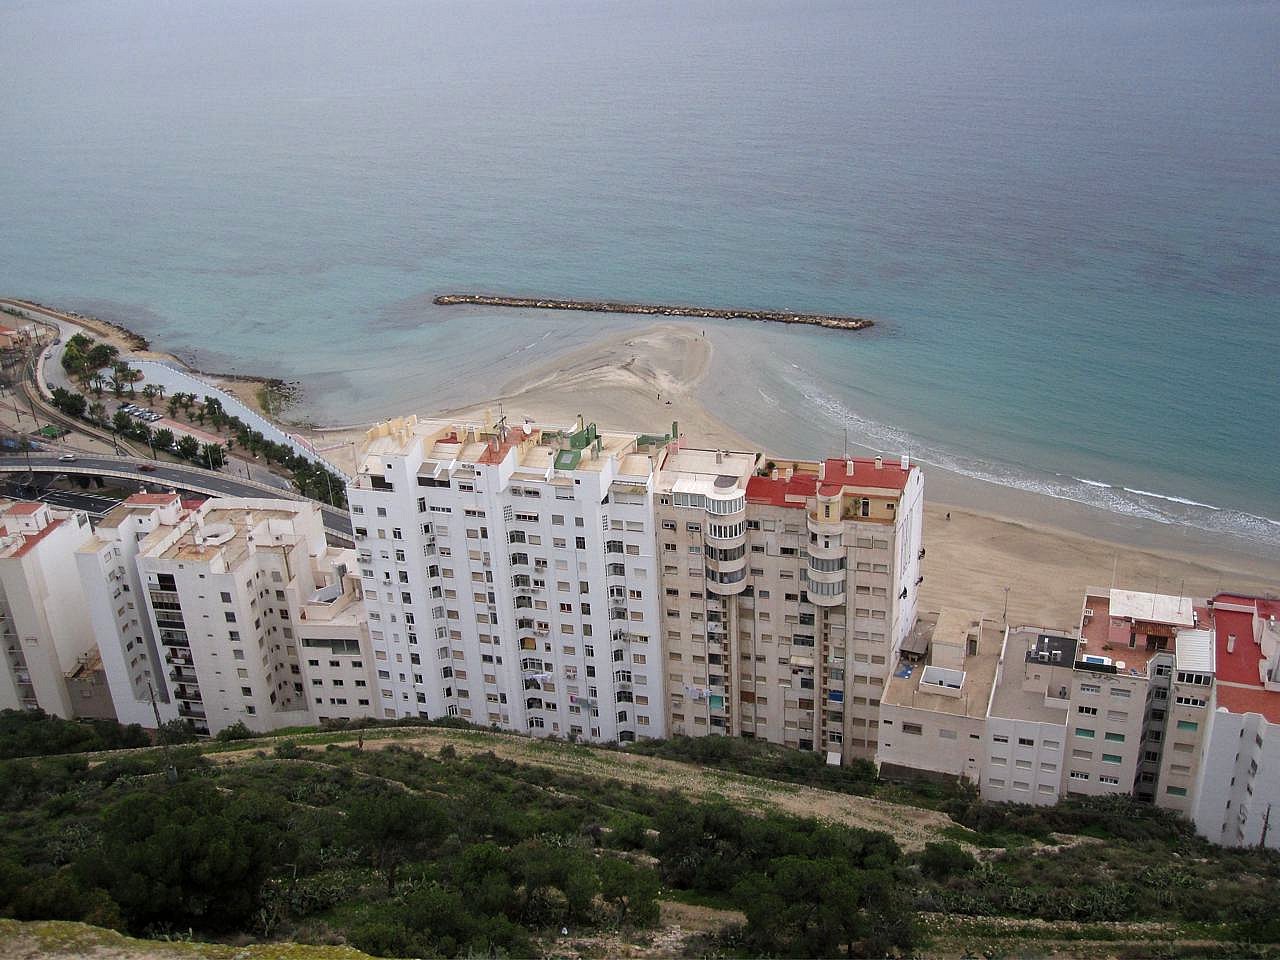 a beach and a city is shown, seen from above